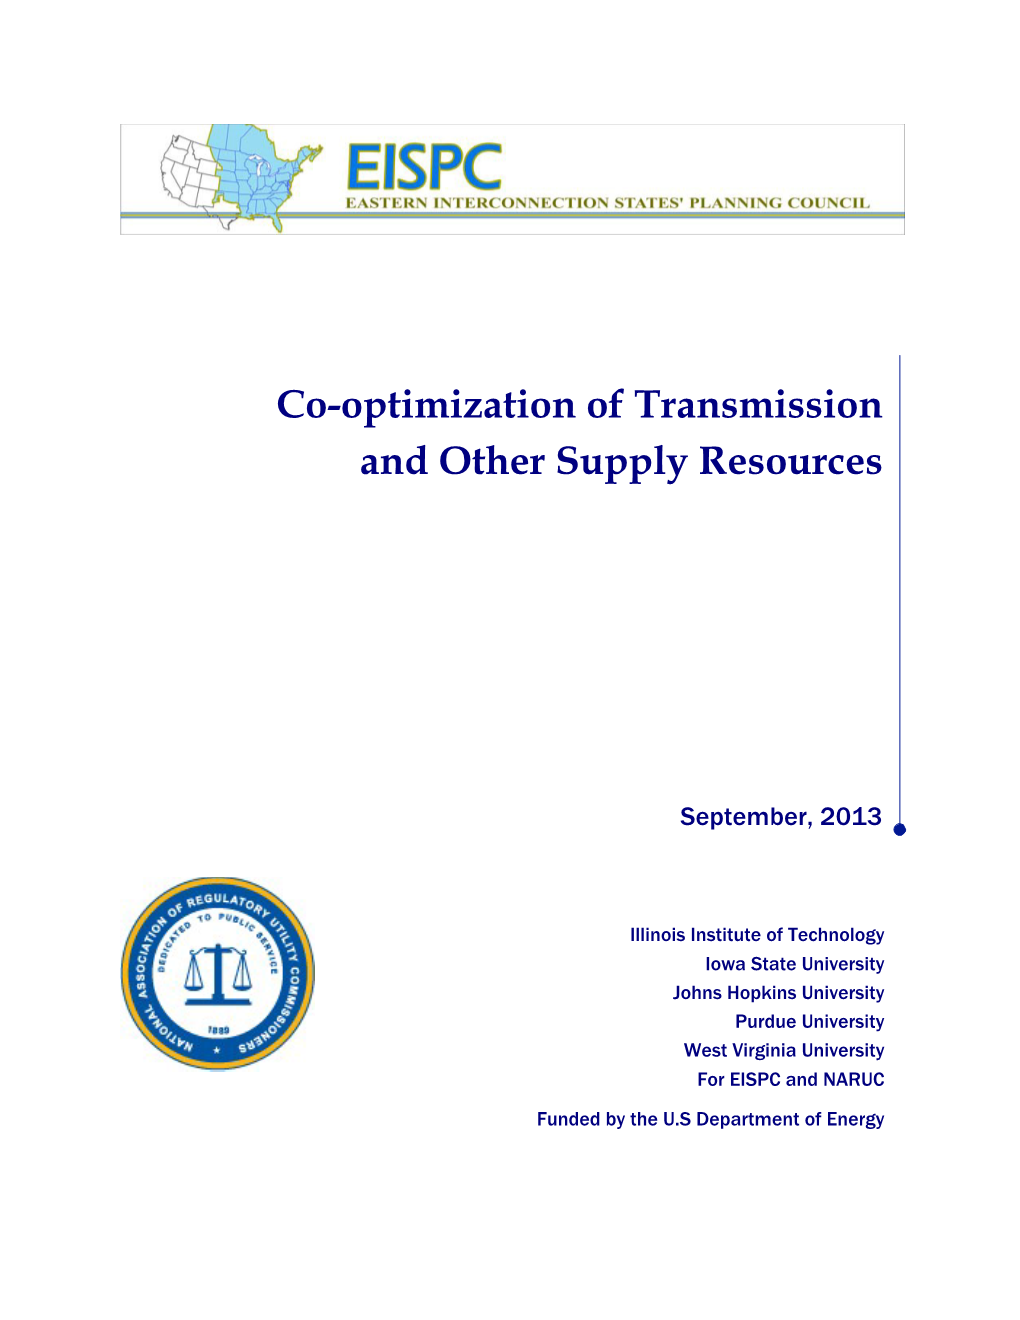 Co-Optimization of Transmission and Other Supply Resources